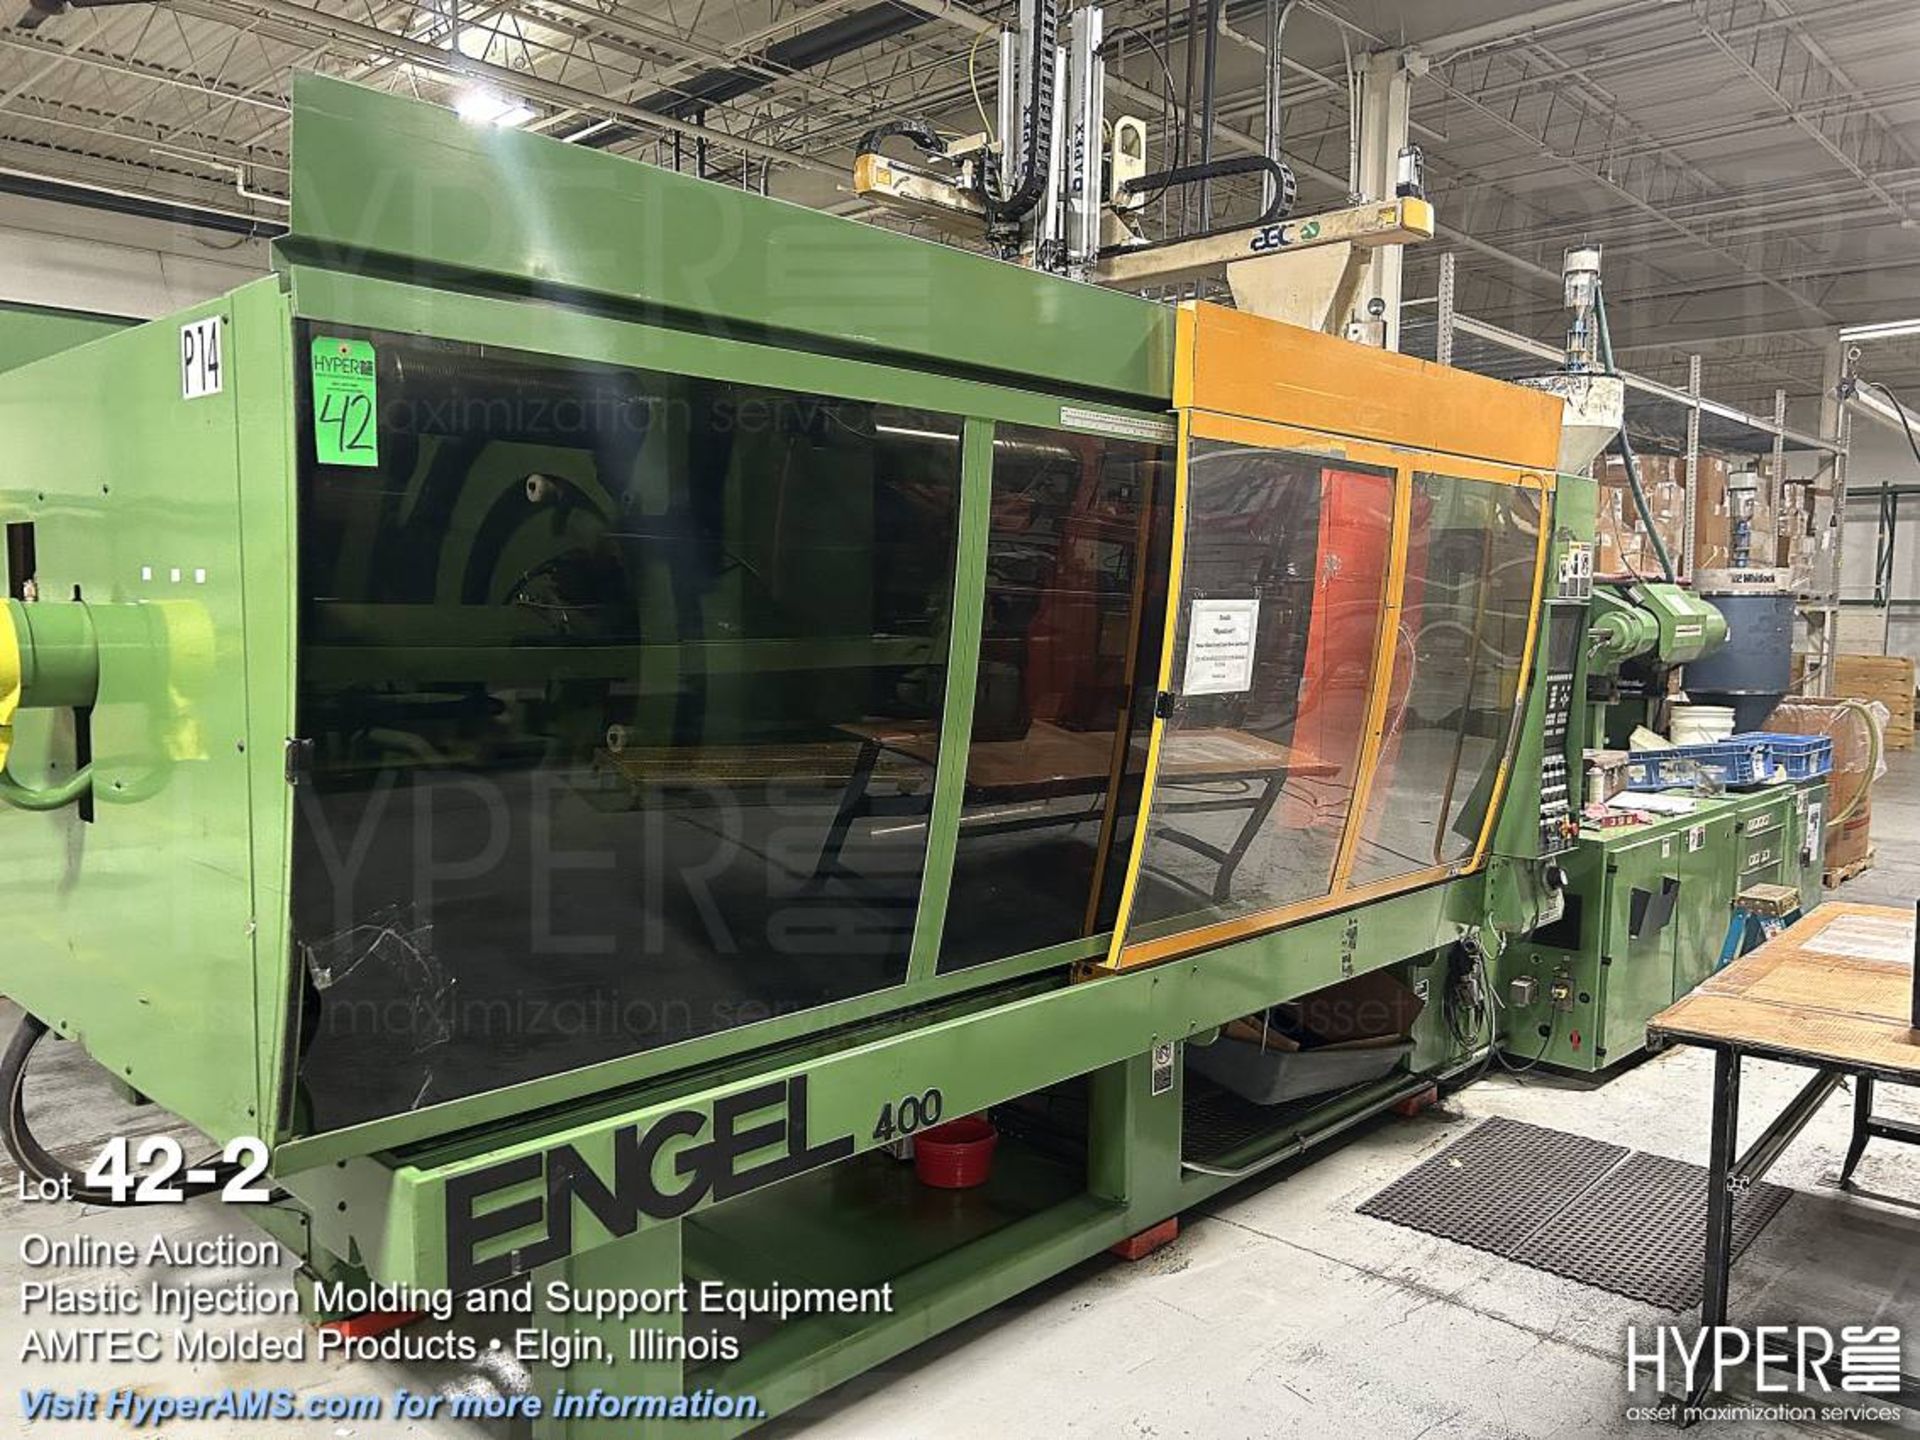 Engel ES2050/400AH toggle clamp plastic injection molding machine - Image 2 of 28